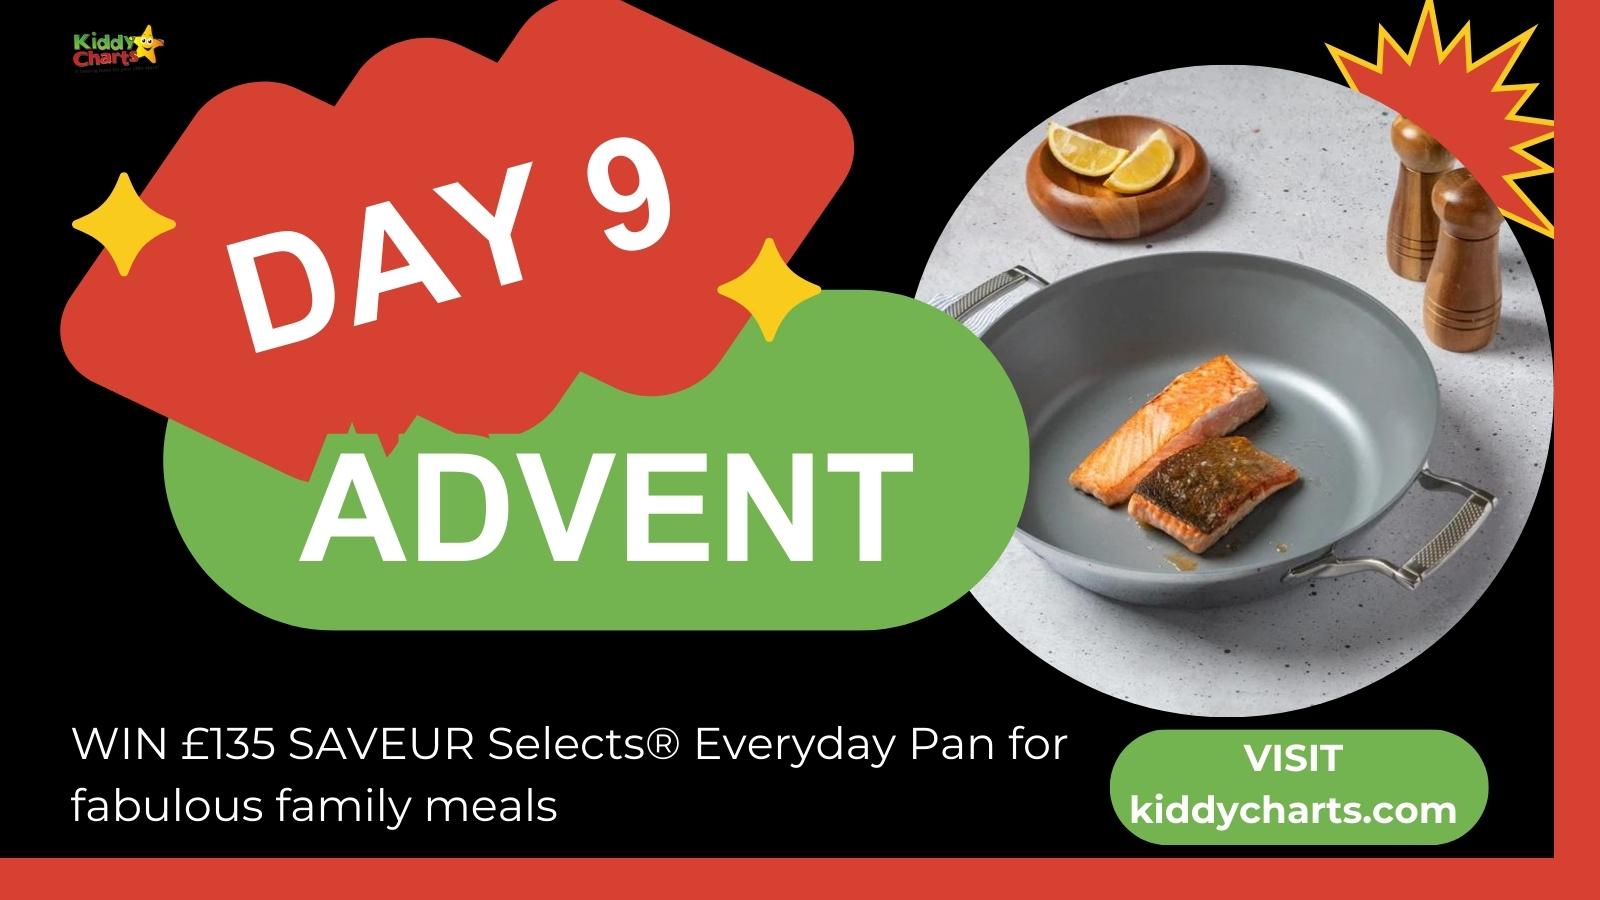 Day 9: Win £135 SAVEUR Selects everyday pan for fabulous family meals #KiddyChartsAdvent